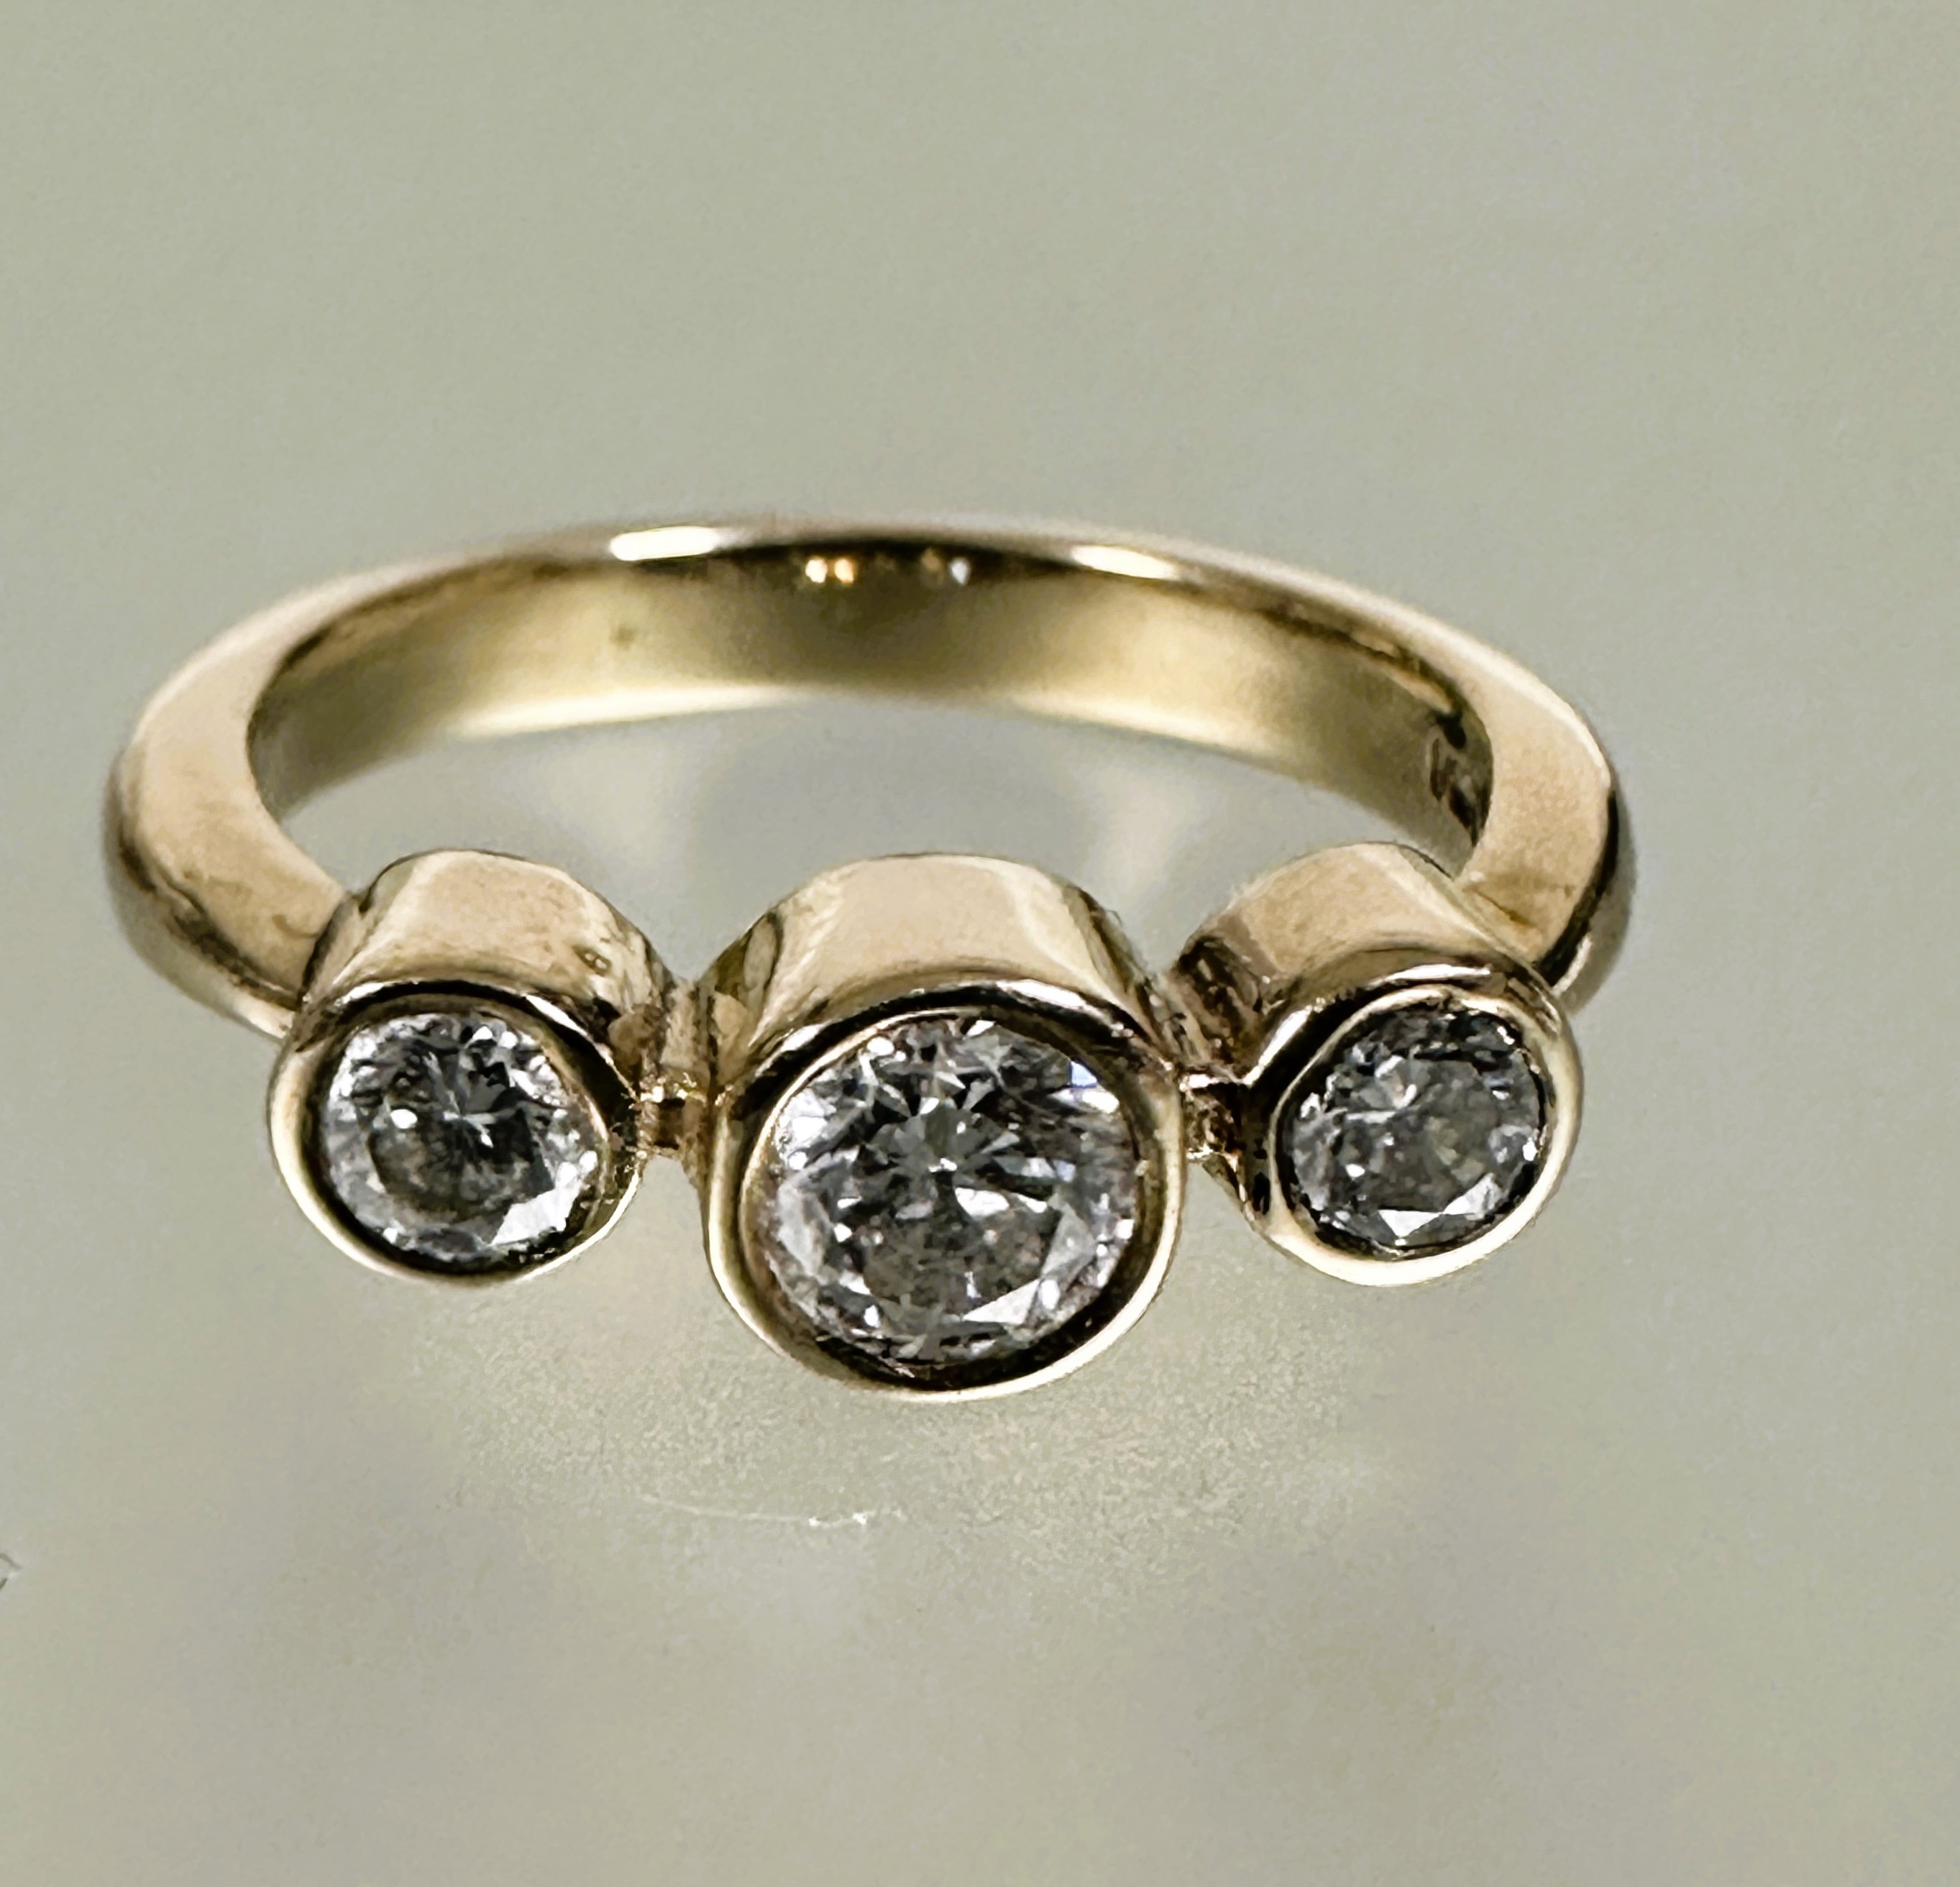 A 9ct gold diamond three stone graduated ring, the center stone approximately 0.28ct collette set